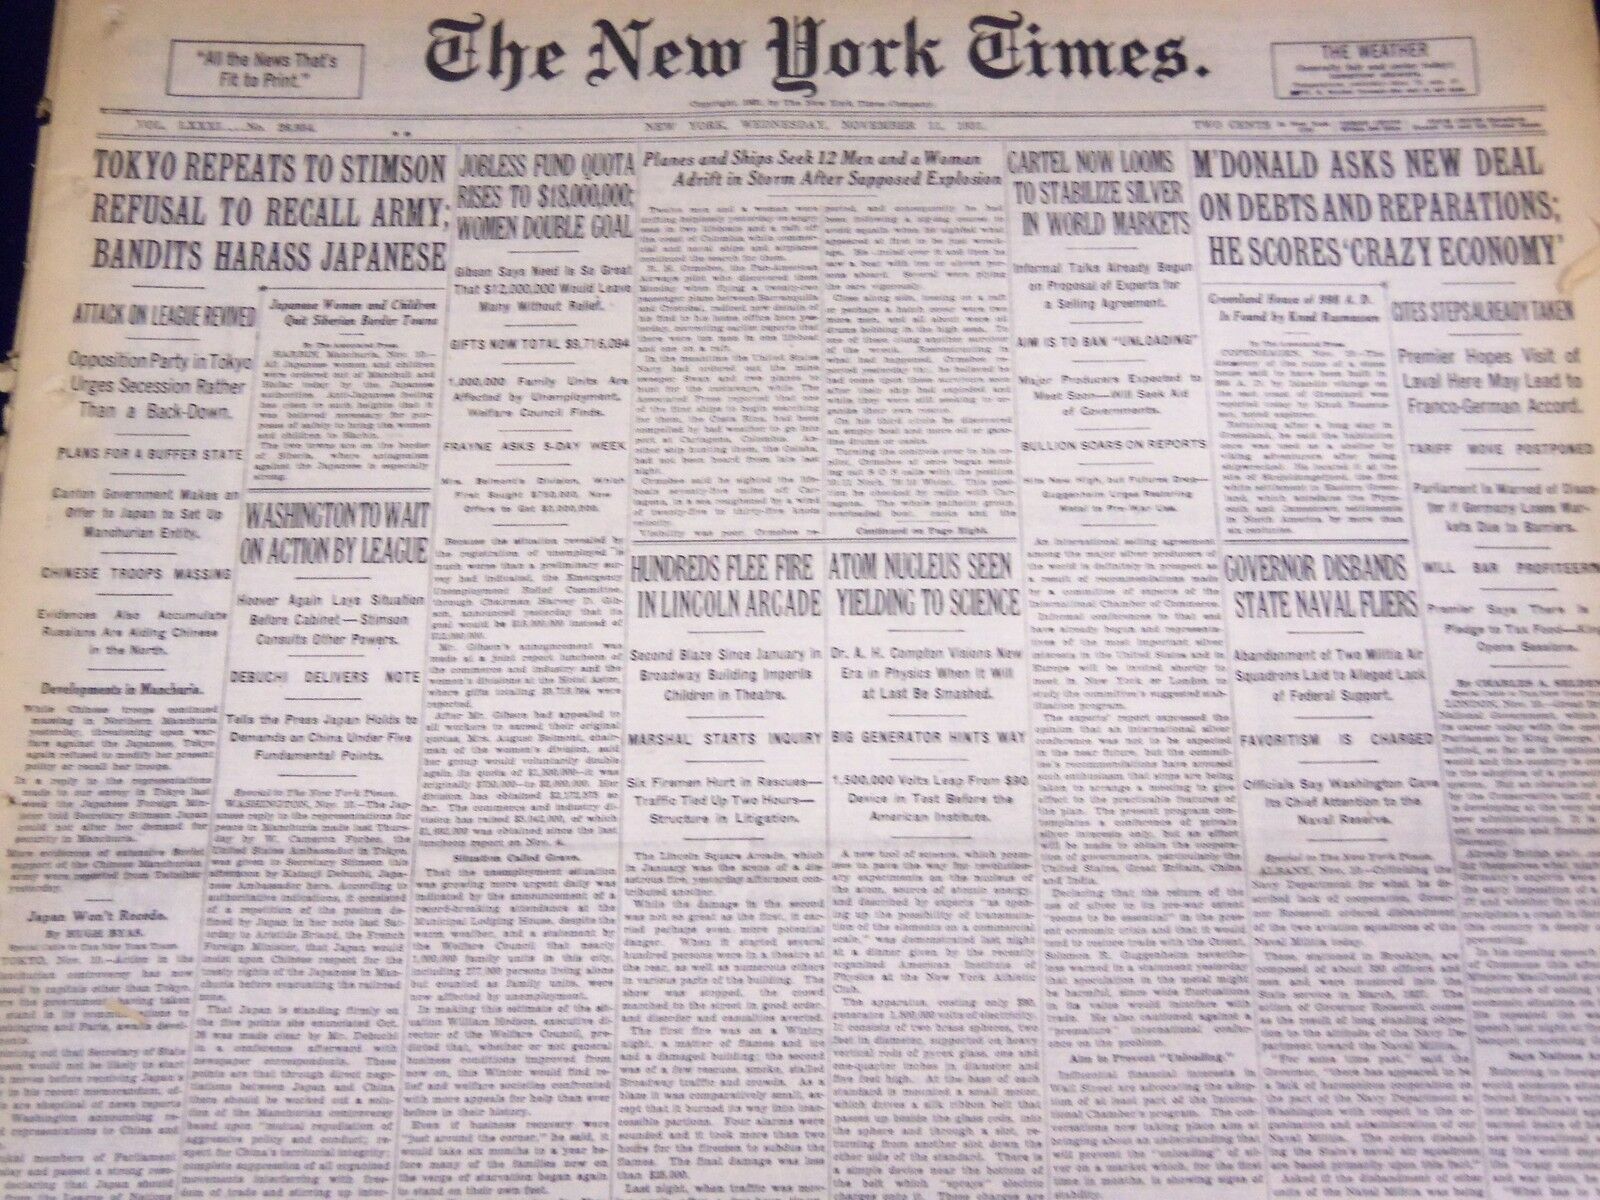 1931 NOV 11 NEW YORK TIMES ATOM NUCLEUS SEEN YIELDING TO SCIENCE - NT 2441